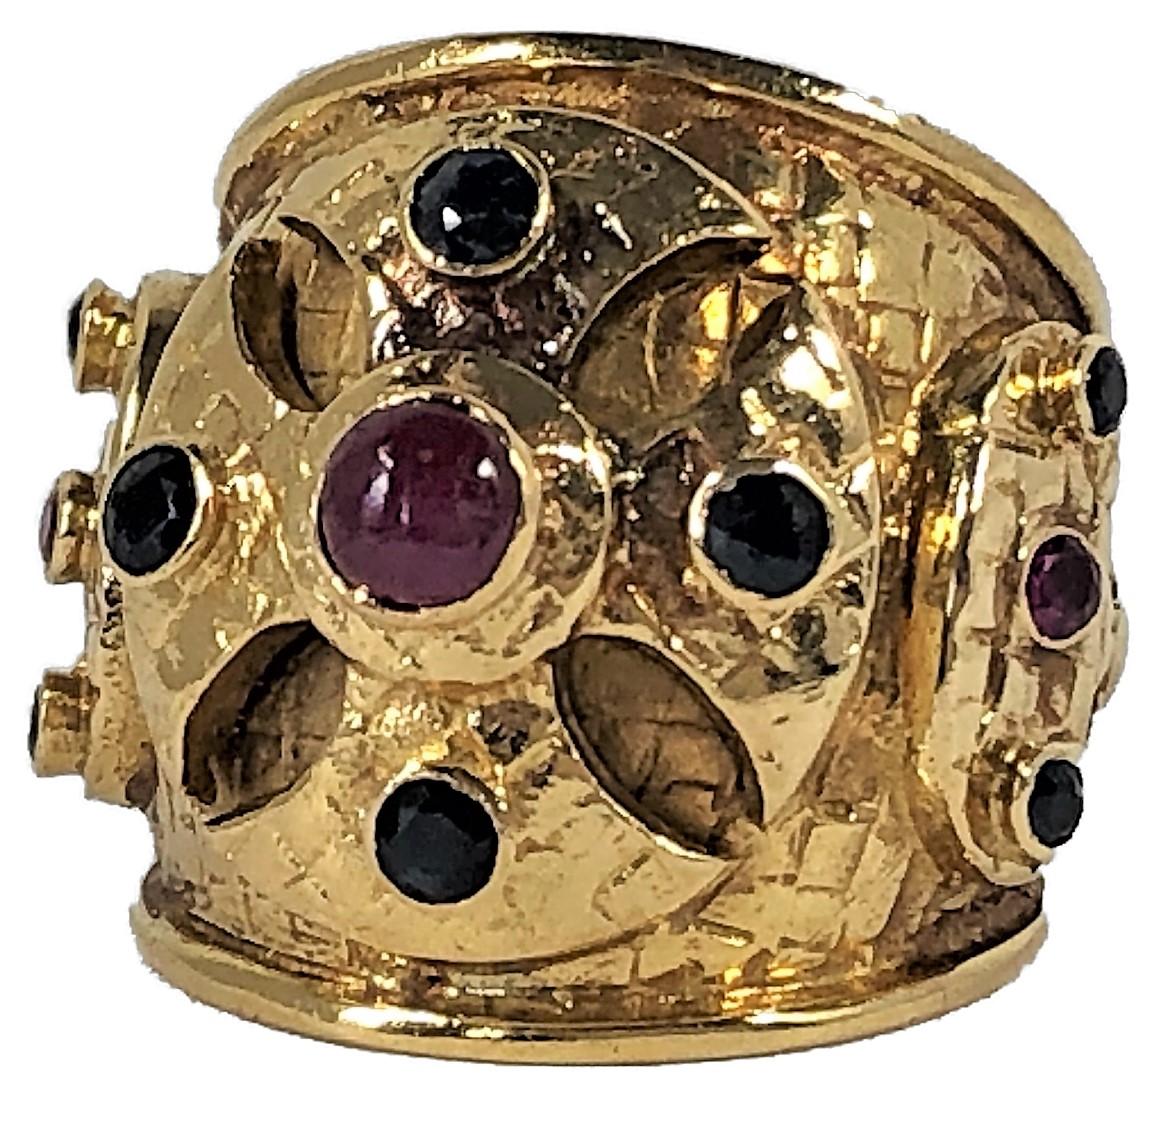 Large Scale Lalaounis Gold Band Ring with Rubies and Sapphires 2